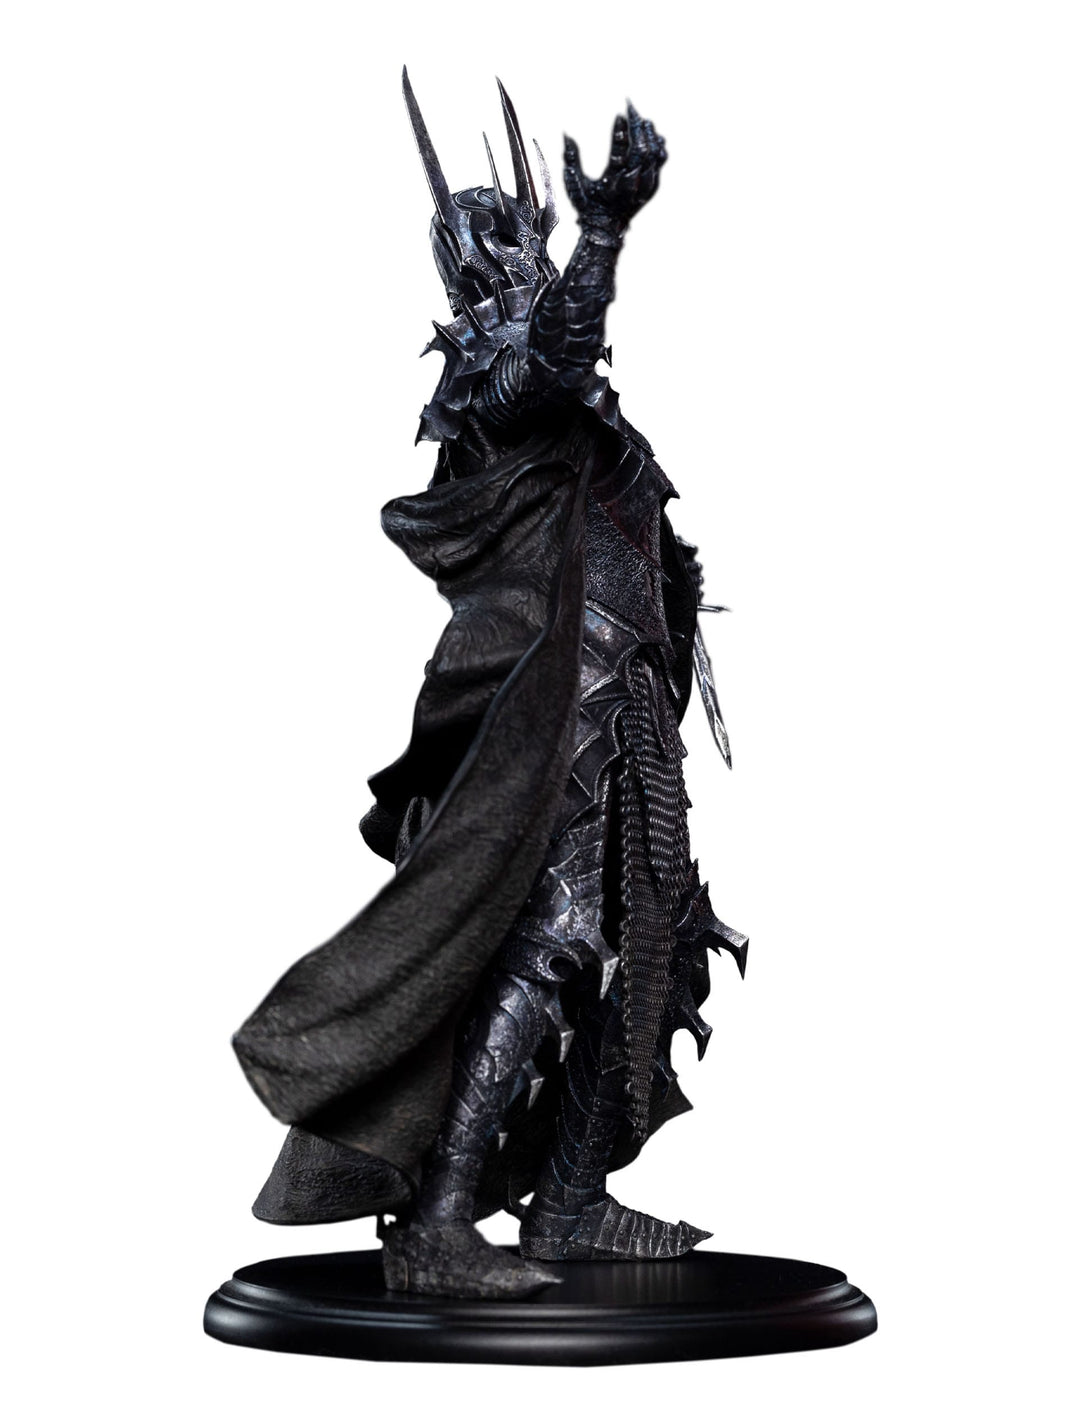 The Lord of the Rings Sauron Statue